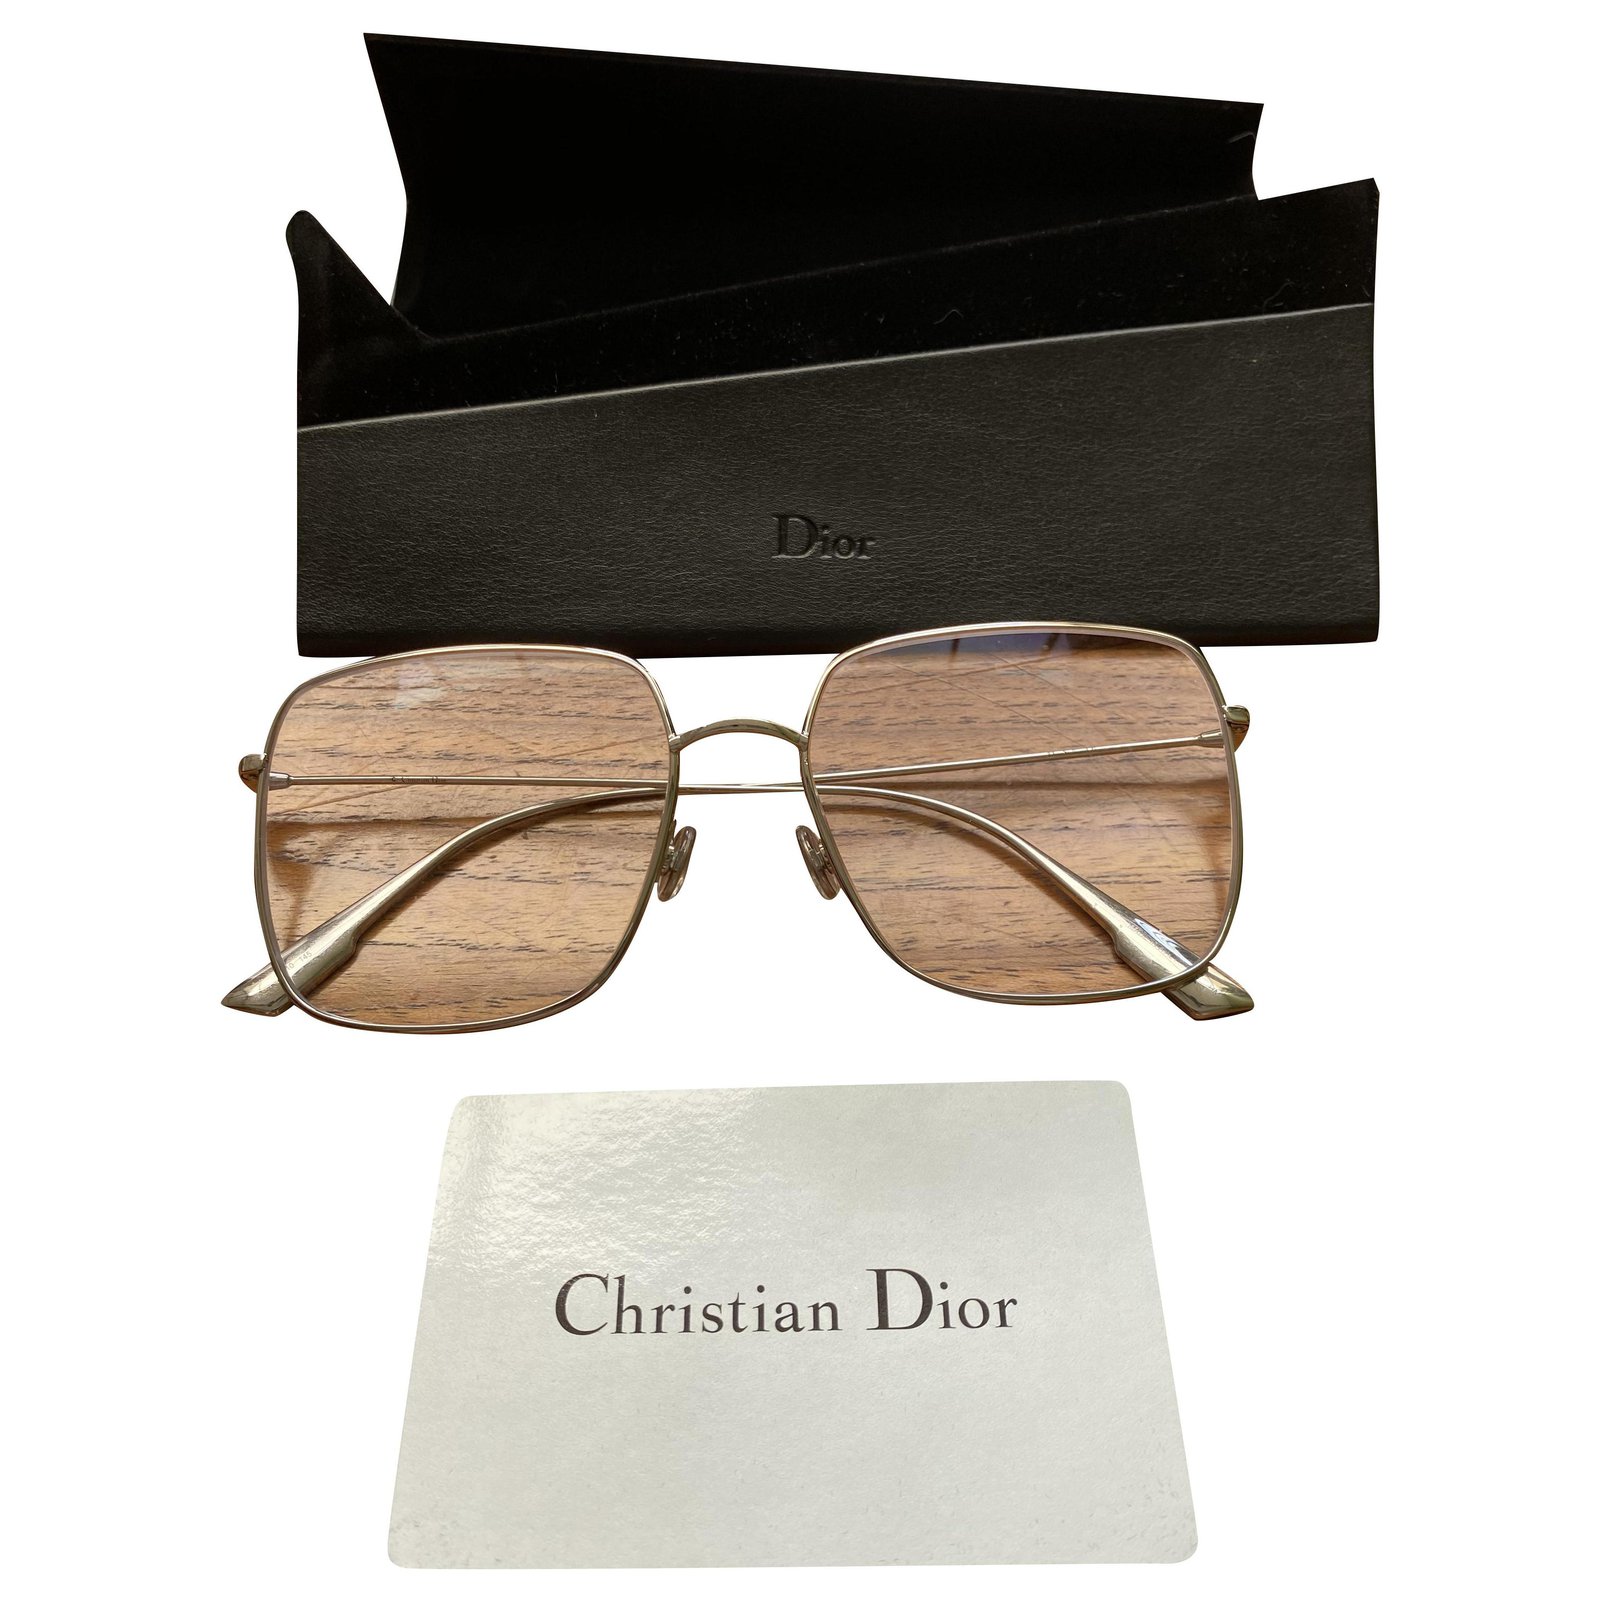 dior spectacle frames